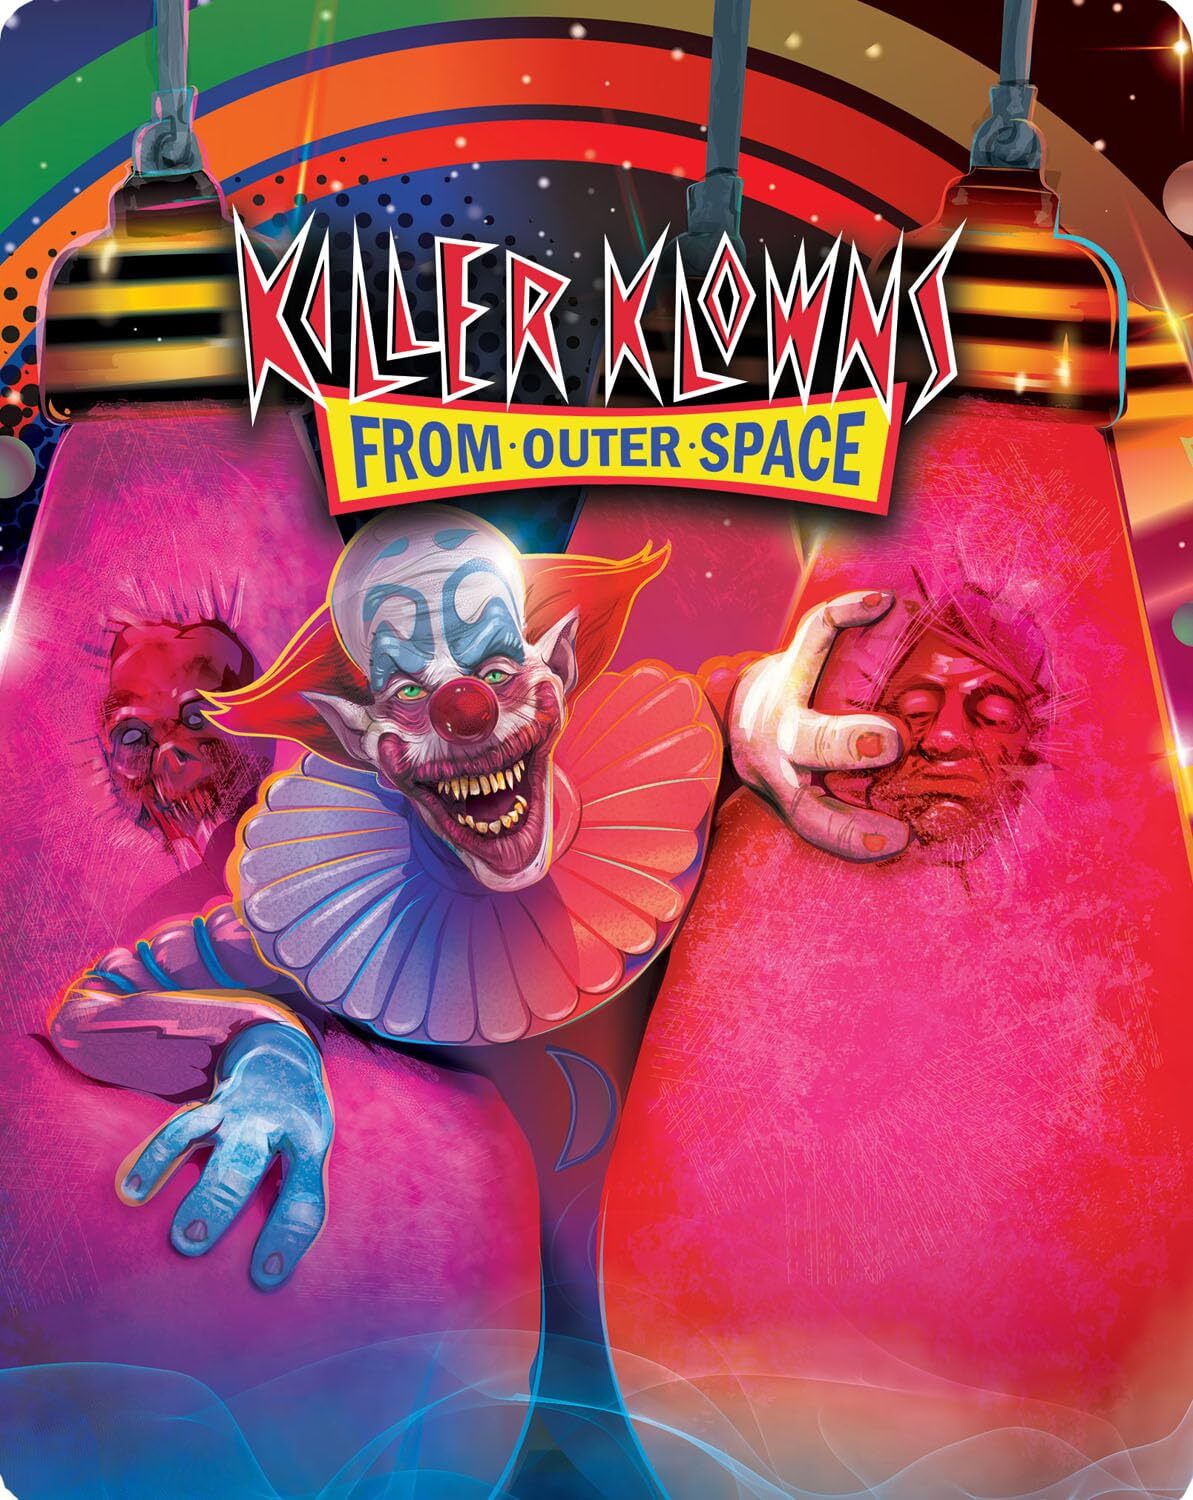 KILLER KLOWNS FROM OUTER SPACE (LIMITED EDITION) 4K UHD/BLU-RAY STEELBOOK [PRE-ORDER]